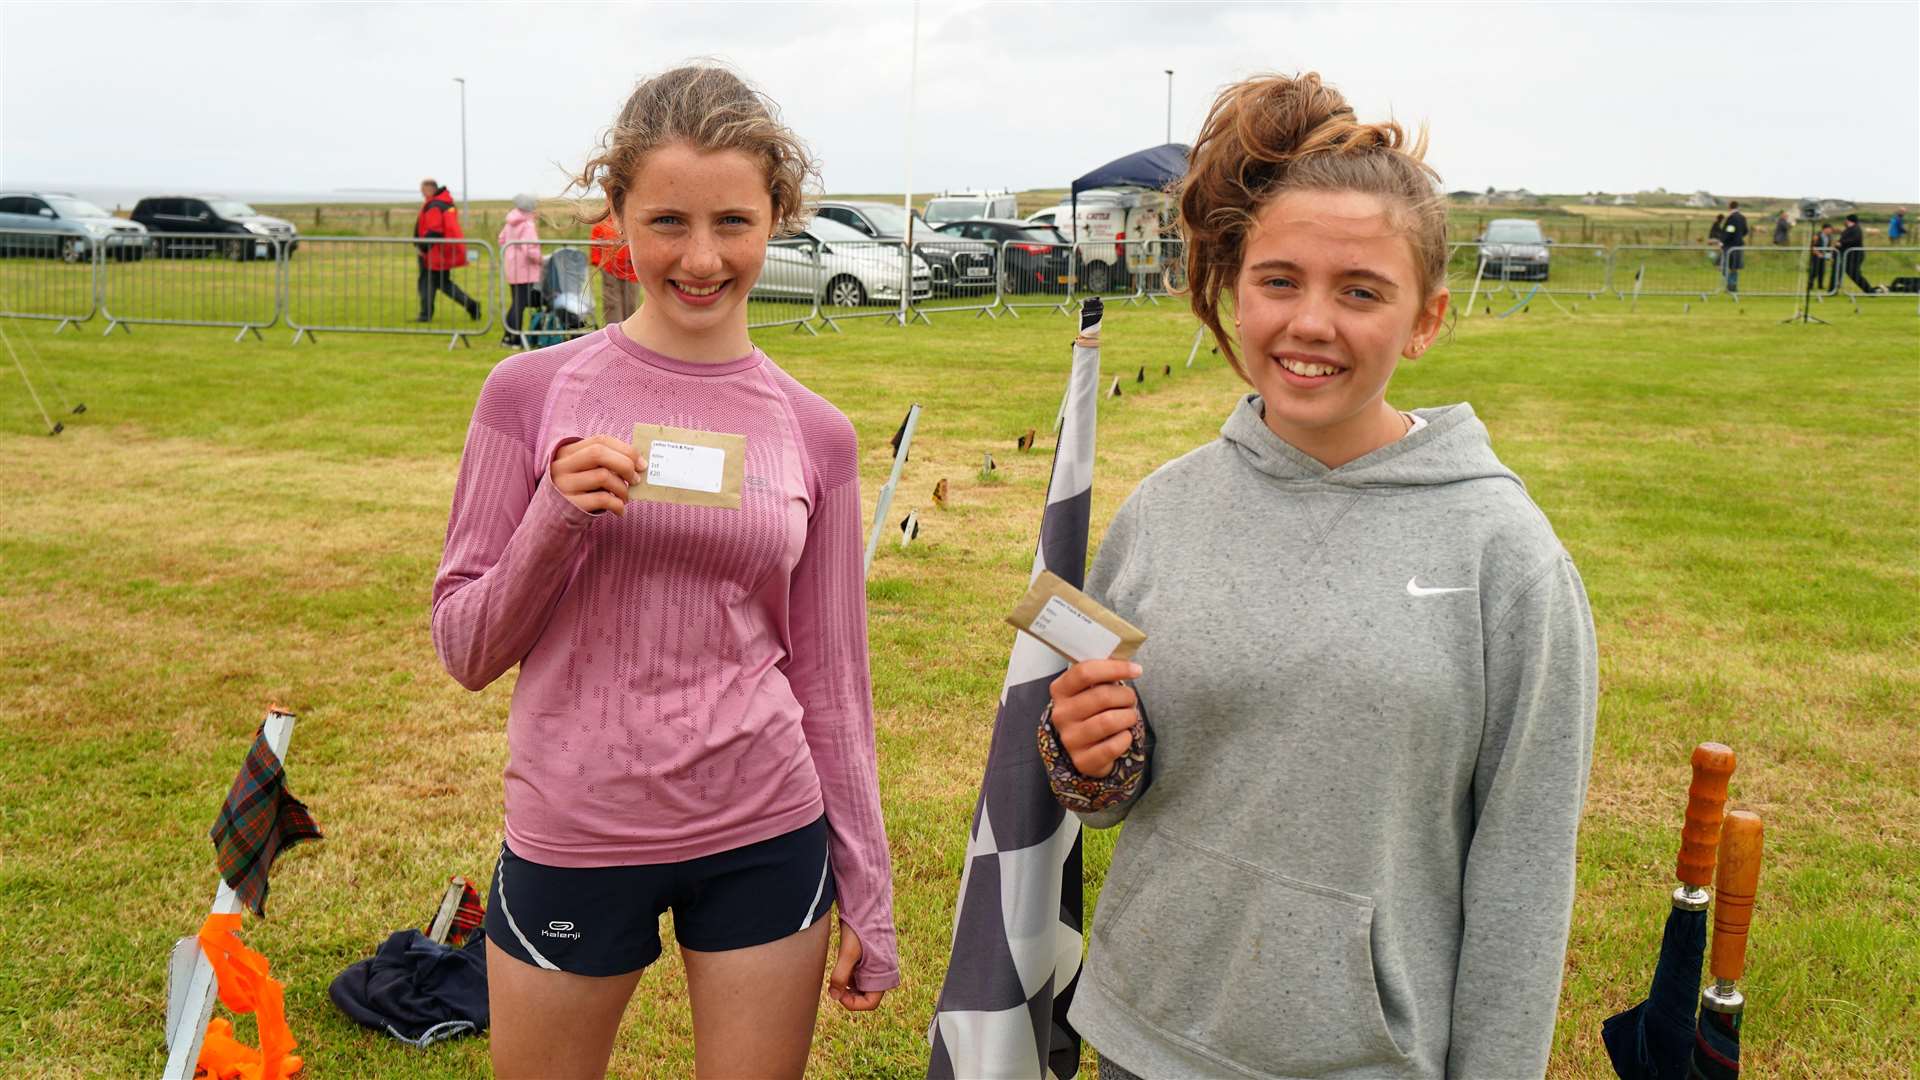 Iolanthe Cooper (left) and sister Adah. Iolanthe won the 400m ladies' race and her sister came in second. Picture: DGS